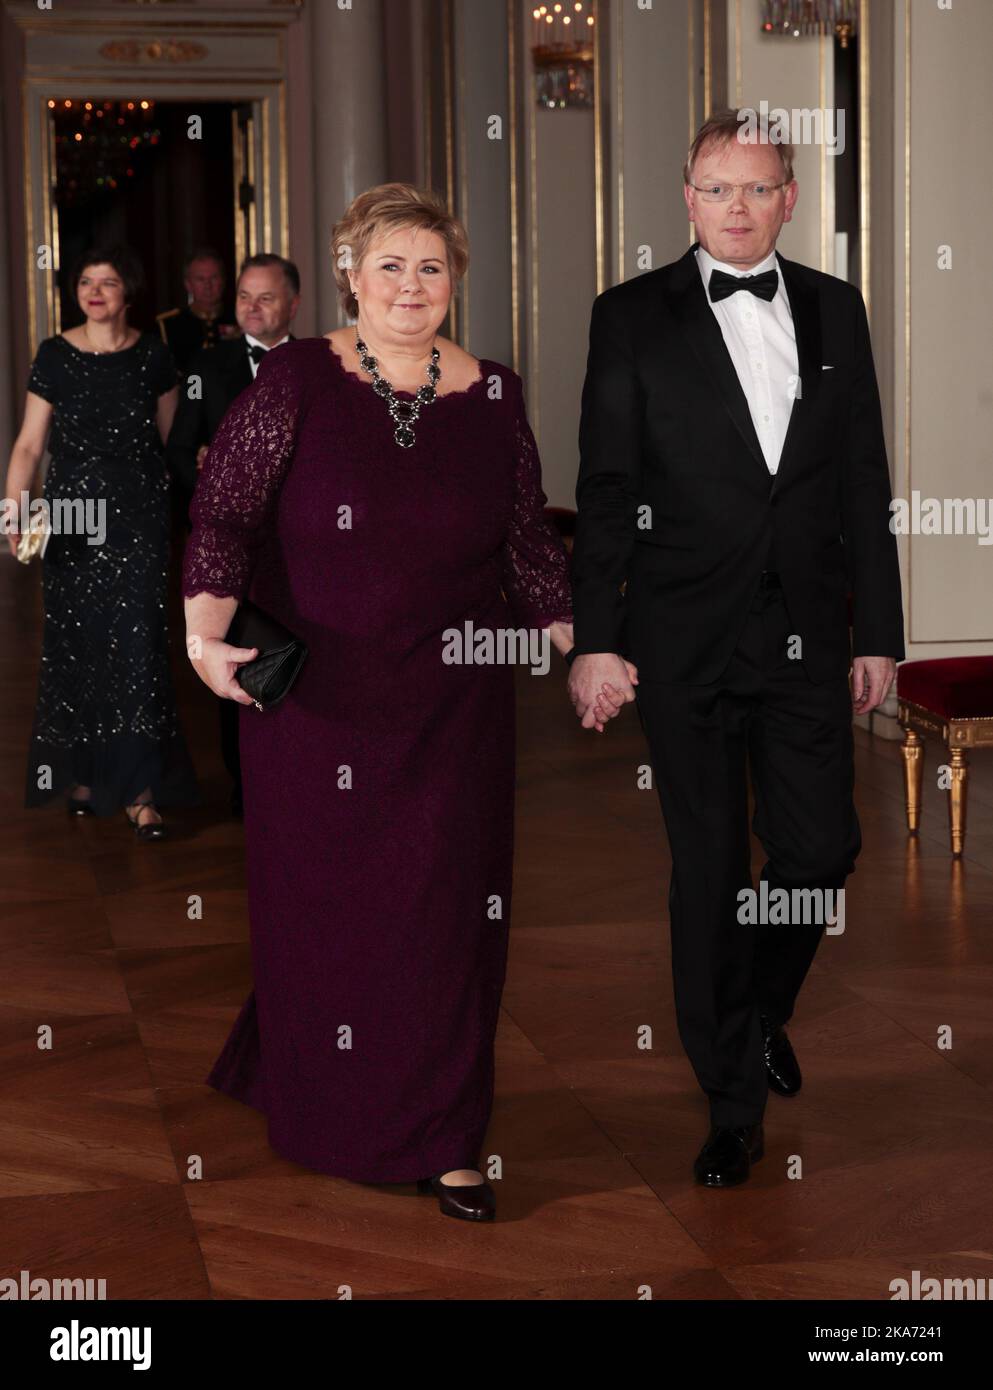 Oslo, Norway 20180201. Prime Minister Erna Solberg and her husband Sindre Finnes on the way to the gala dinner at the Royal Castle in connection with Prince William and Duchess Catherine's visit to Norway. Photo: Lise Aaserud / NTB scanpi Stock Photo